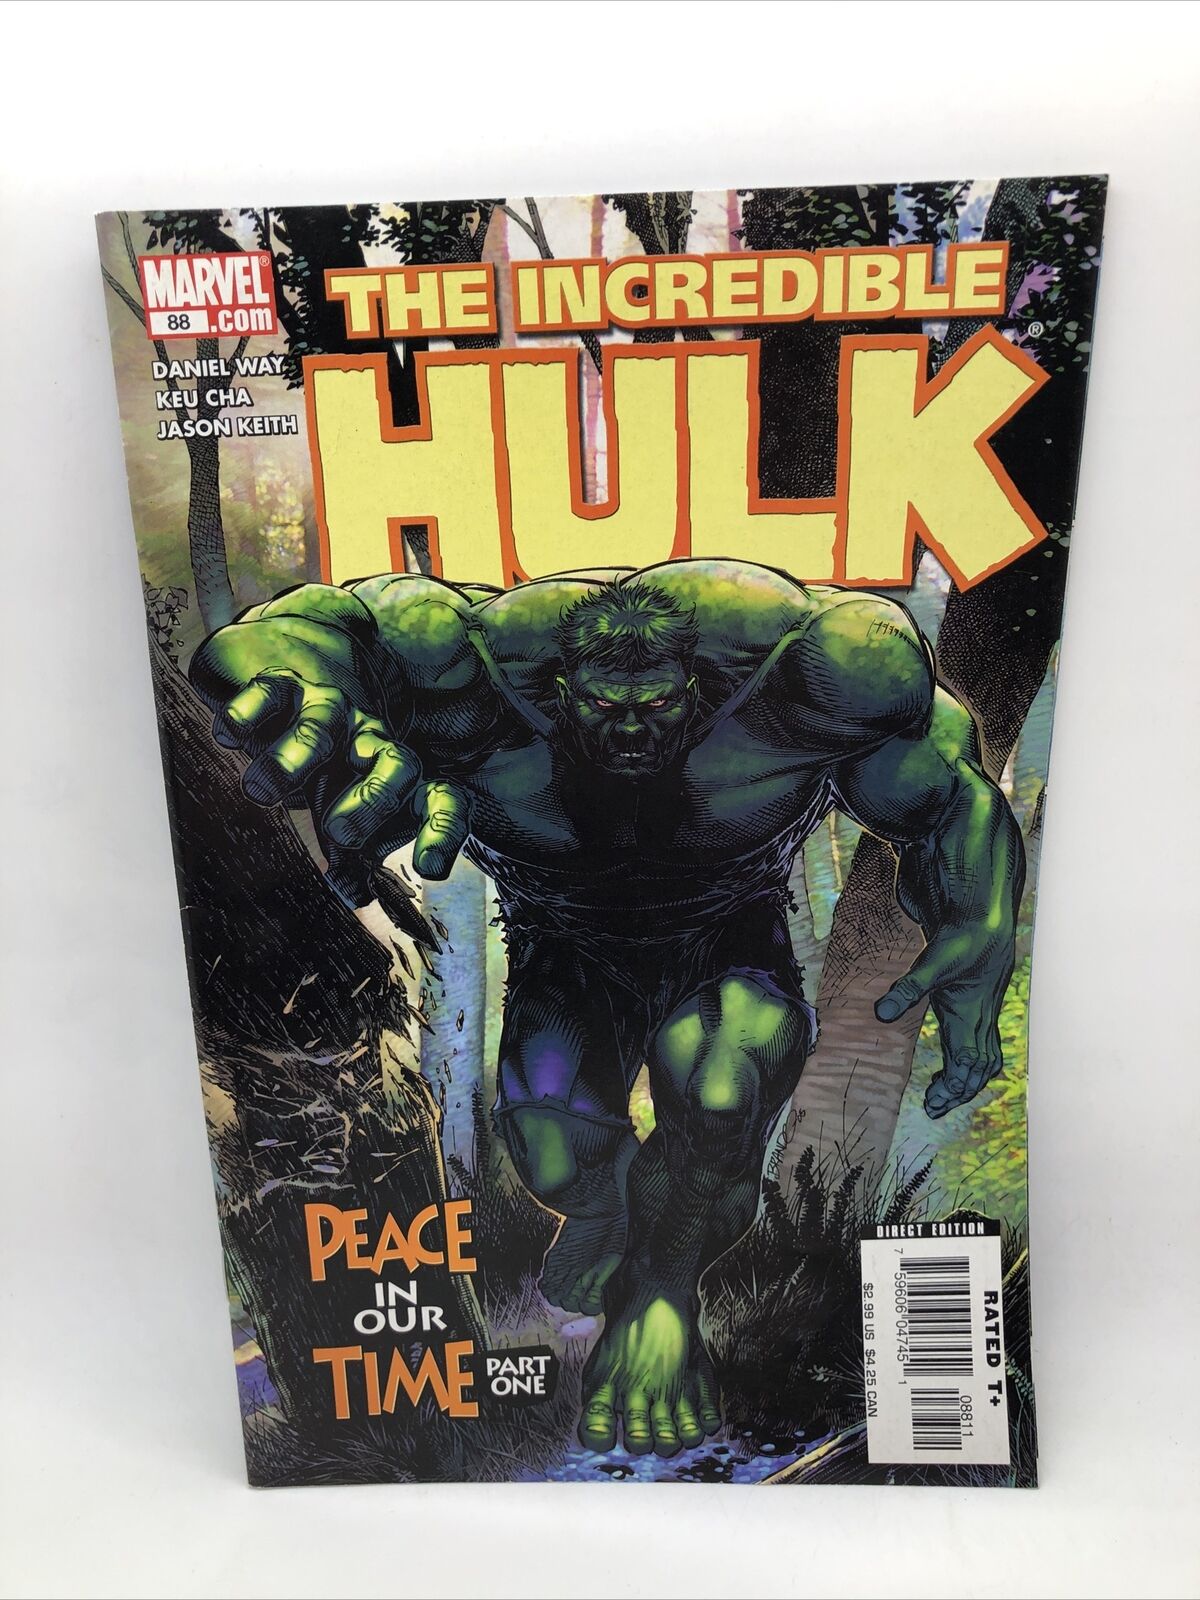 The Incredible Hulk #88 2006 - Peace in our Time Part: 1 of 4